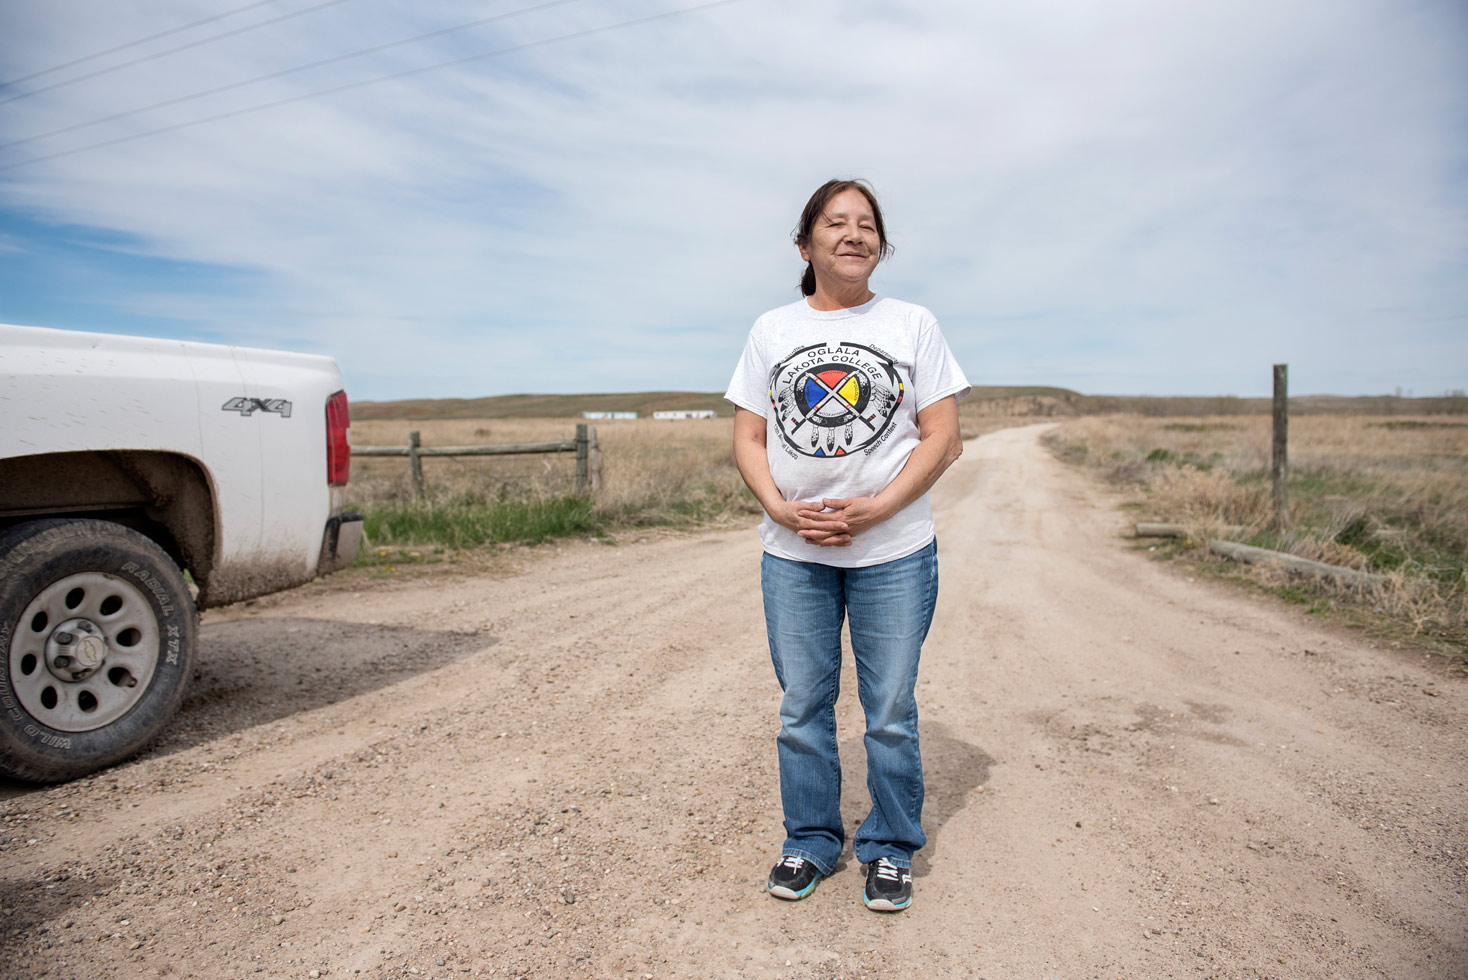 The Pine Ridge Indian Reservation is an Oglala Lakota Native American reservation located in the state of South Dakota. The non-profit organization One Spirit invited Gudrun Georges to document their monthly food drive. One Spirit is not church affiliated and is the only outside organization approved by the Sioux tribal council.